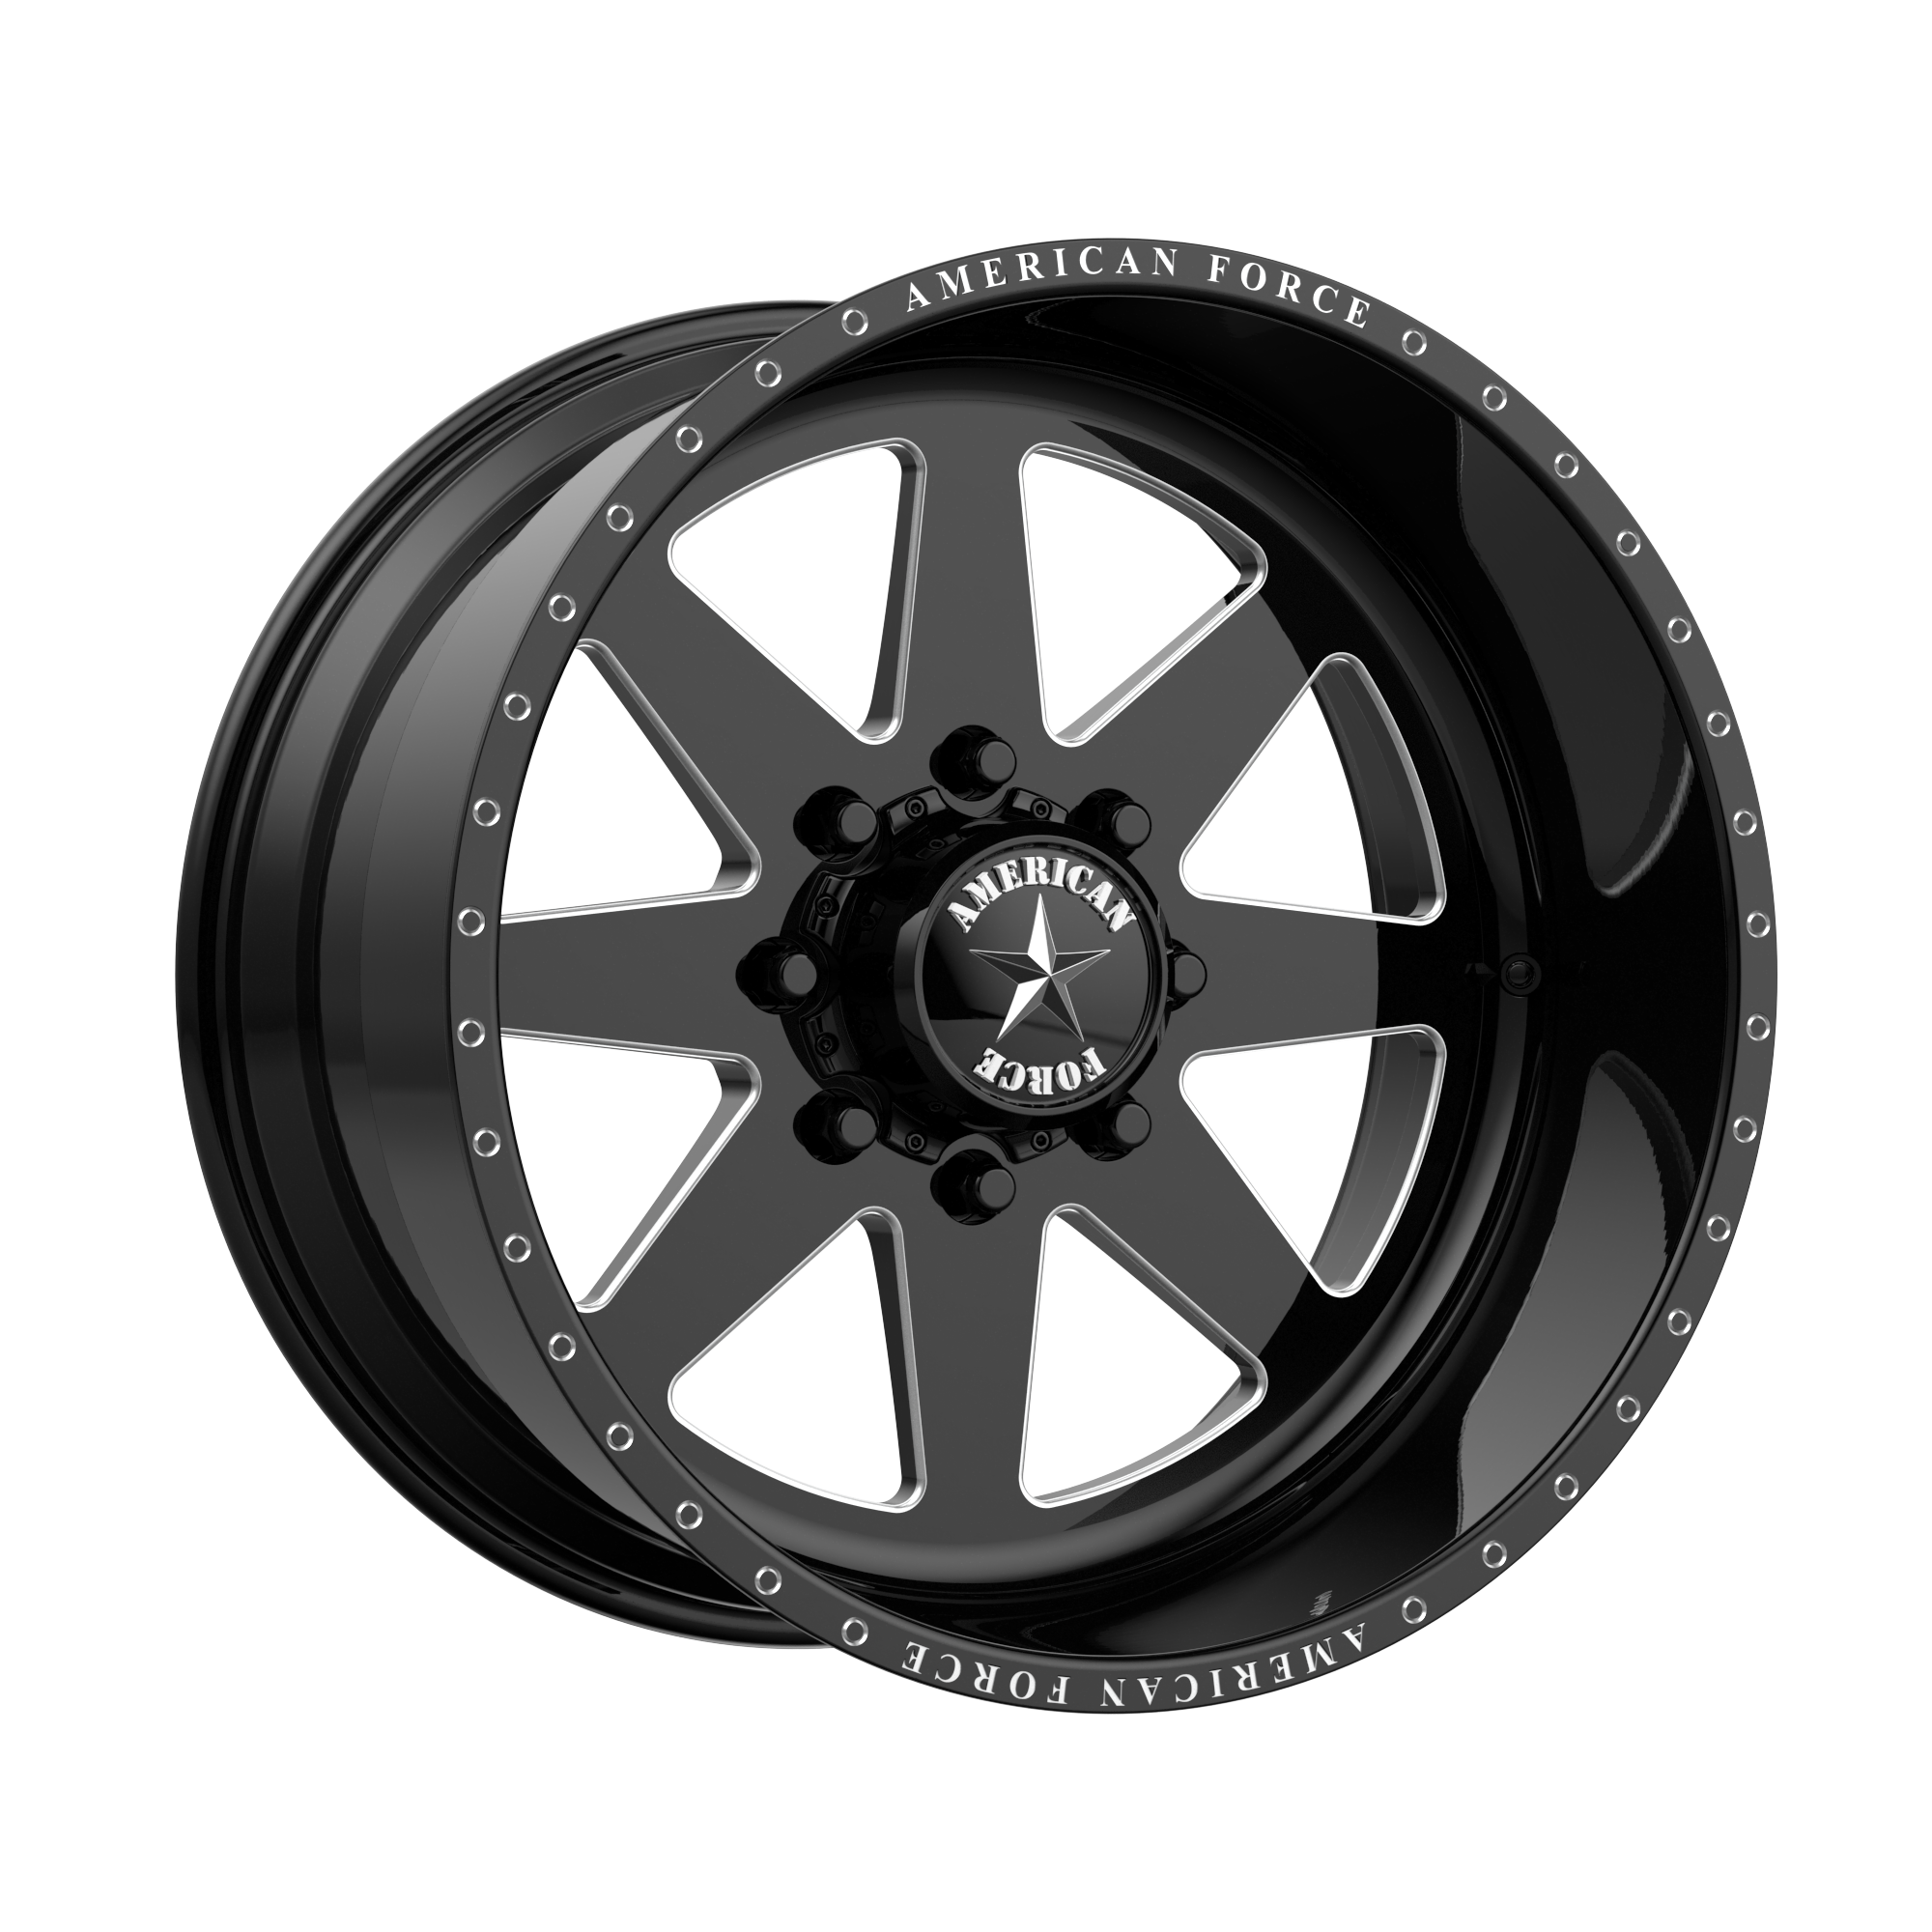 INDEPENDENCE SS 20x10 8x180.00 GLOSS BLACK MACHINED (-25 mm) - Tires and Engine Performance